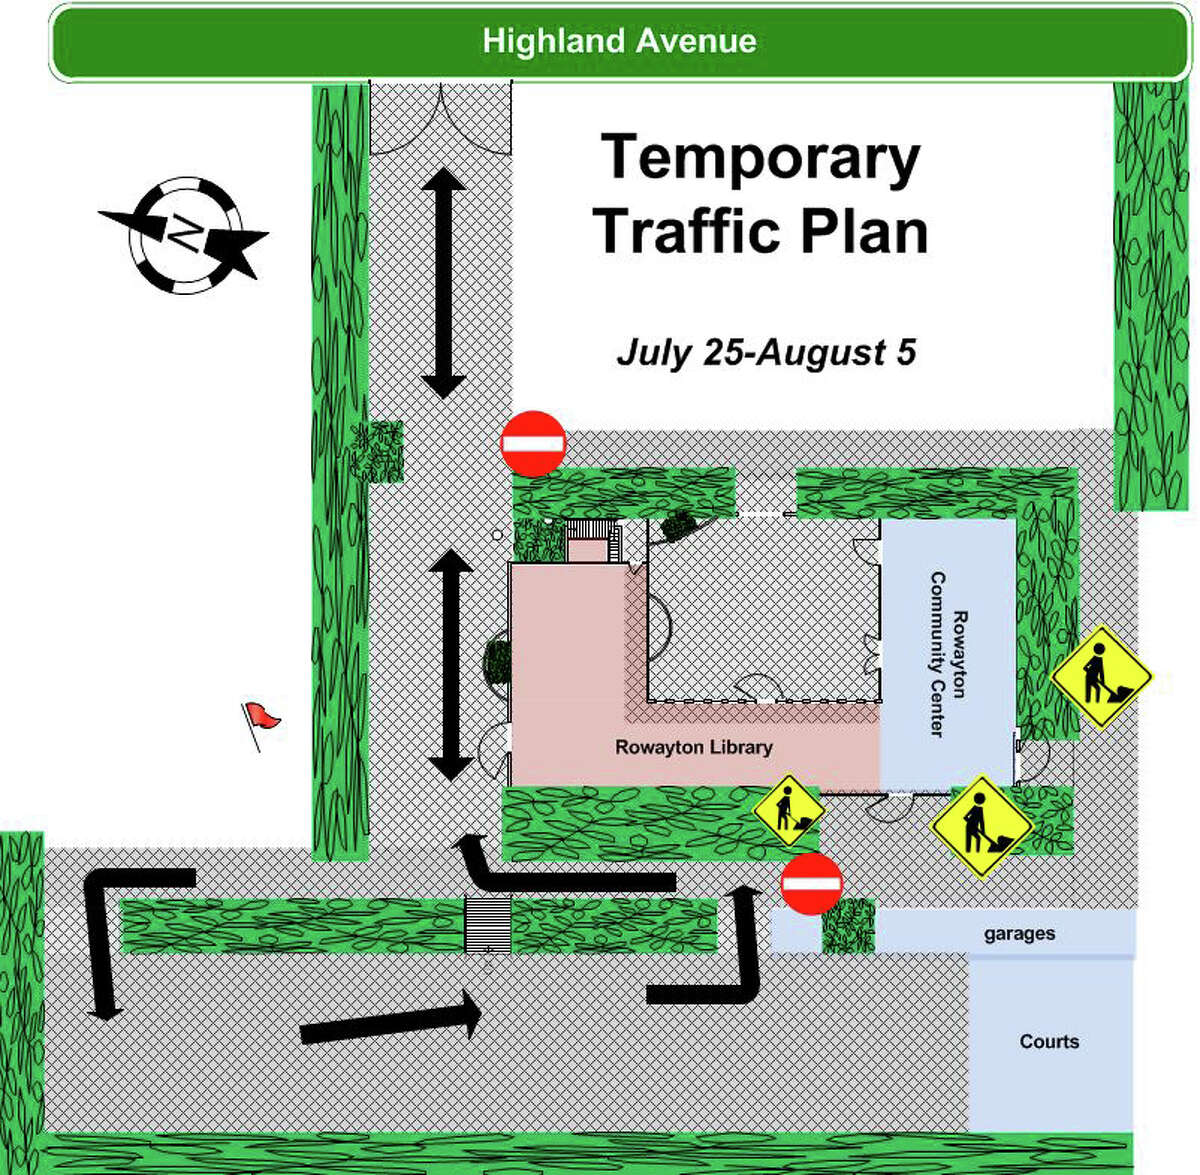 This is the temporary traffic plan for the Rowayton Community Center as its roof gets restored.